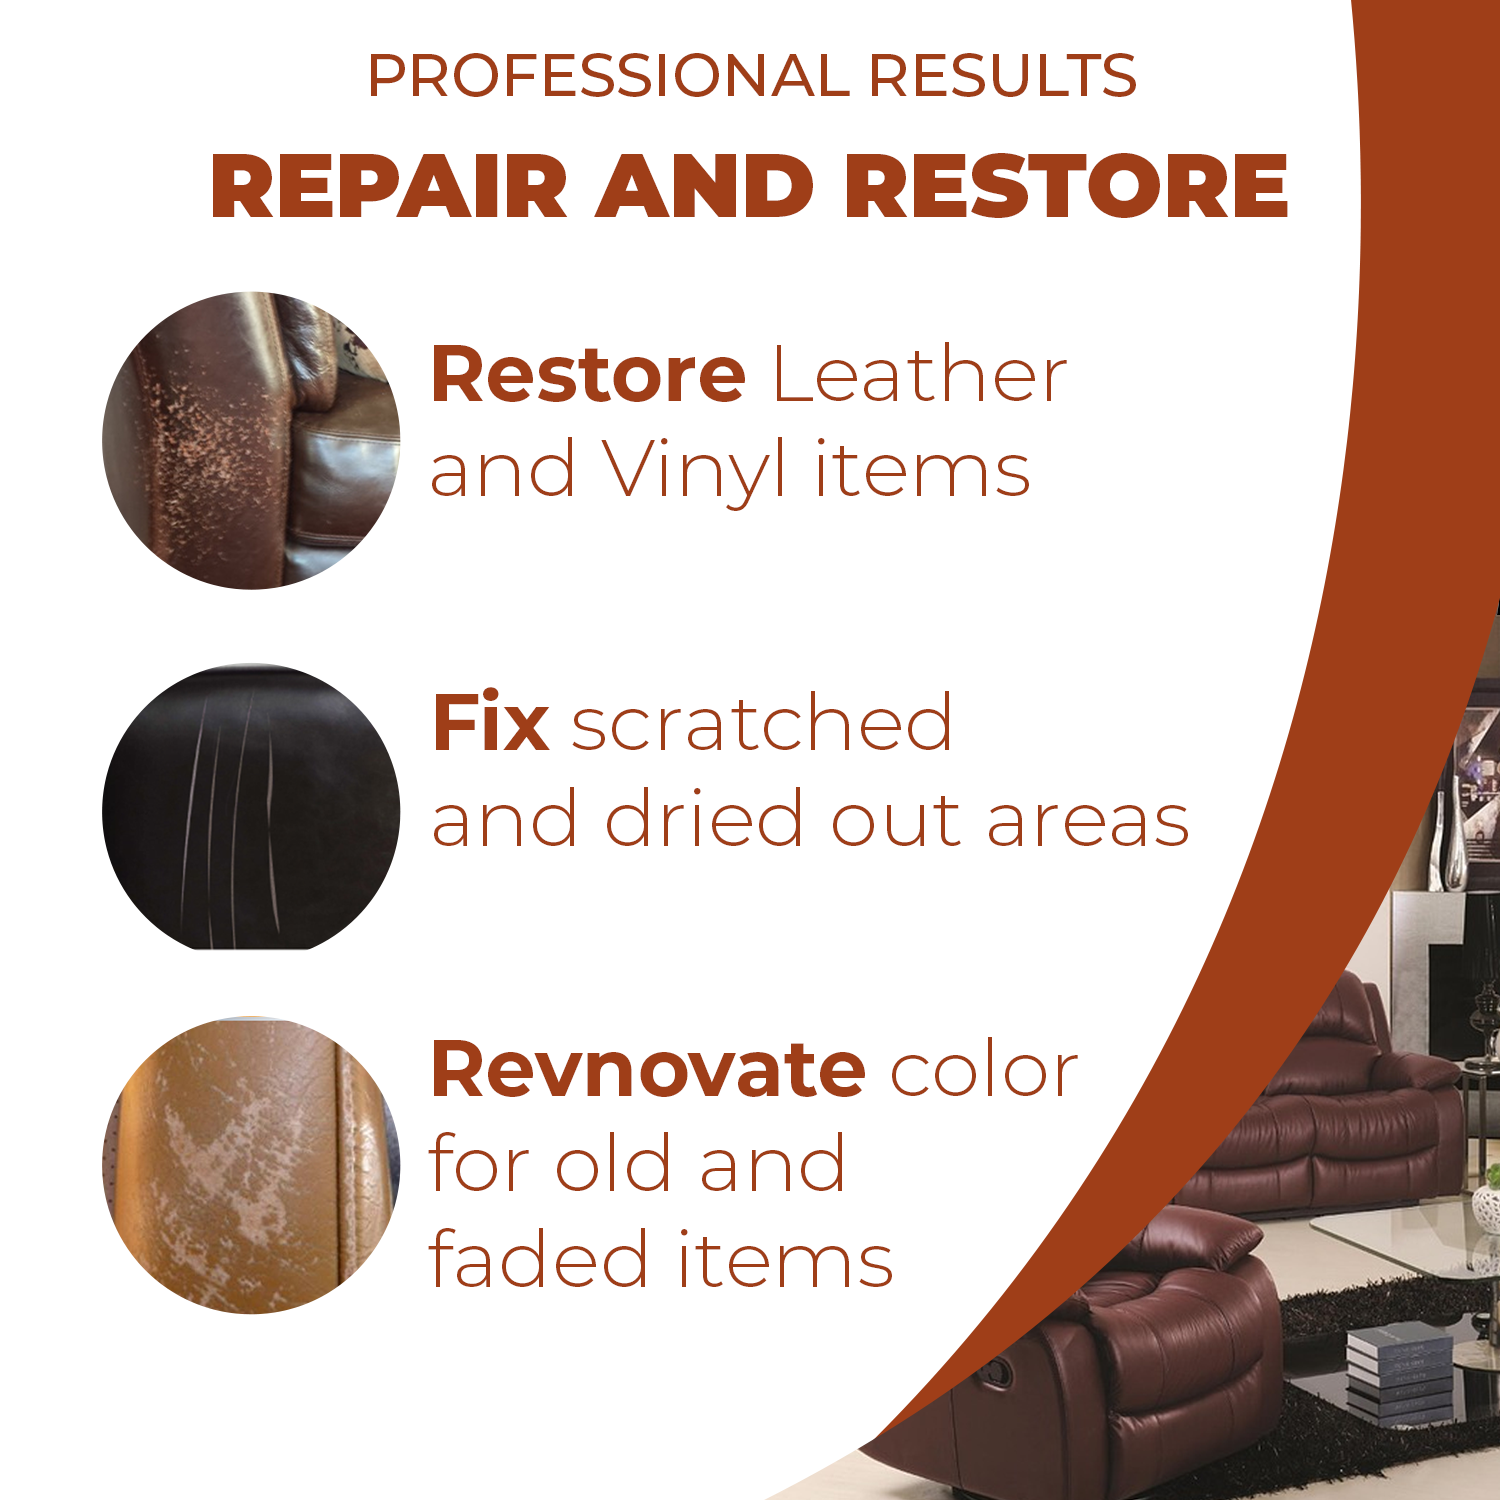 Black Leather Recoloring Balm - Leather Repair Kits for Couches